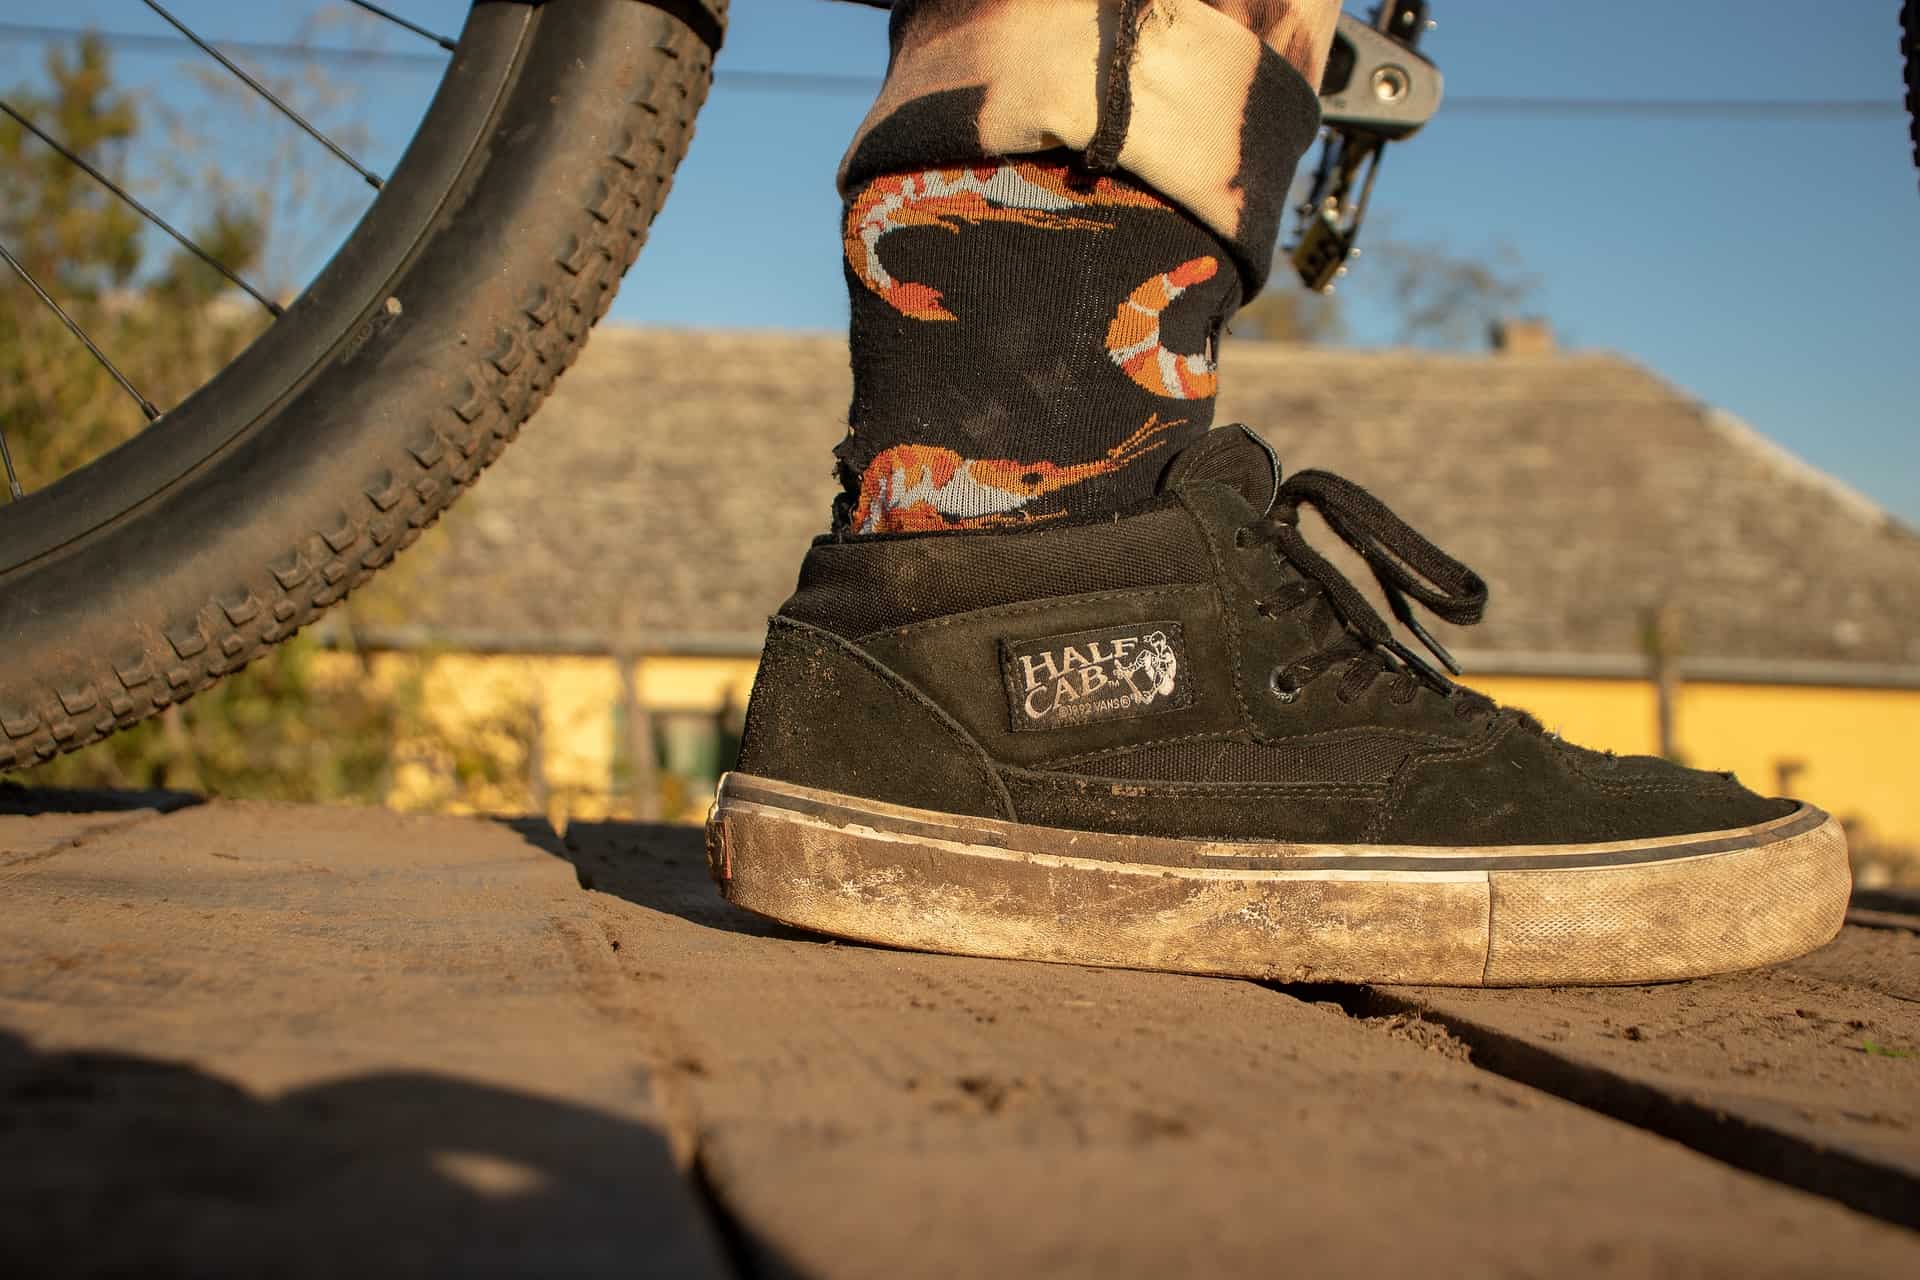 stimuleren Pedagogie Brawl The 8 Best BMX Shoes For An Awesome Ride - The Cyclist Review